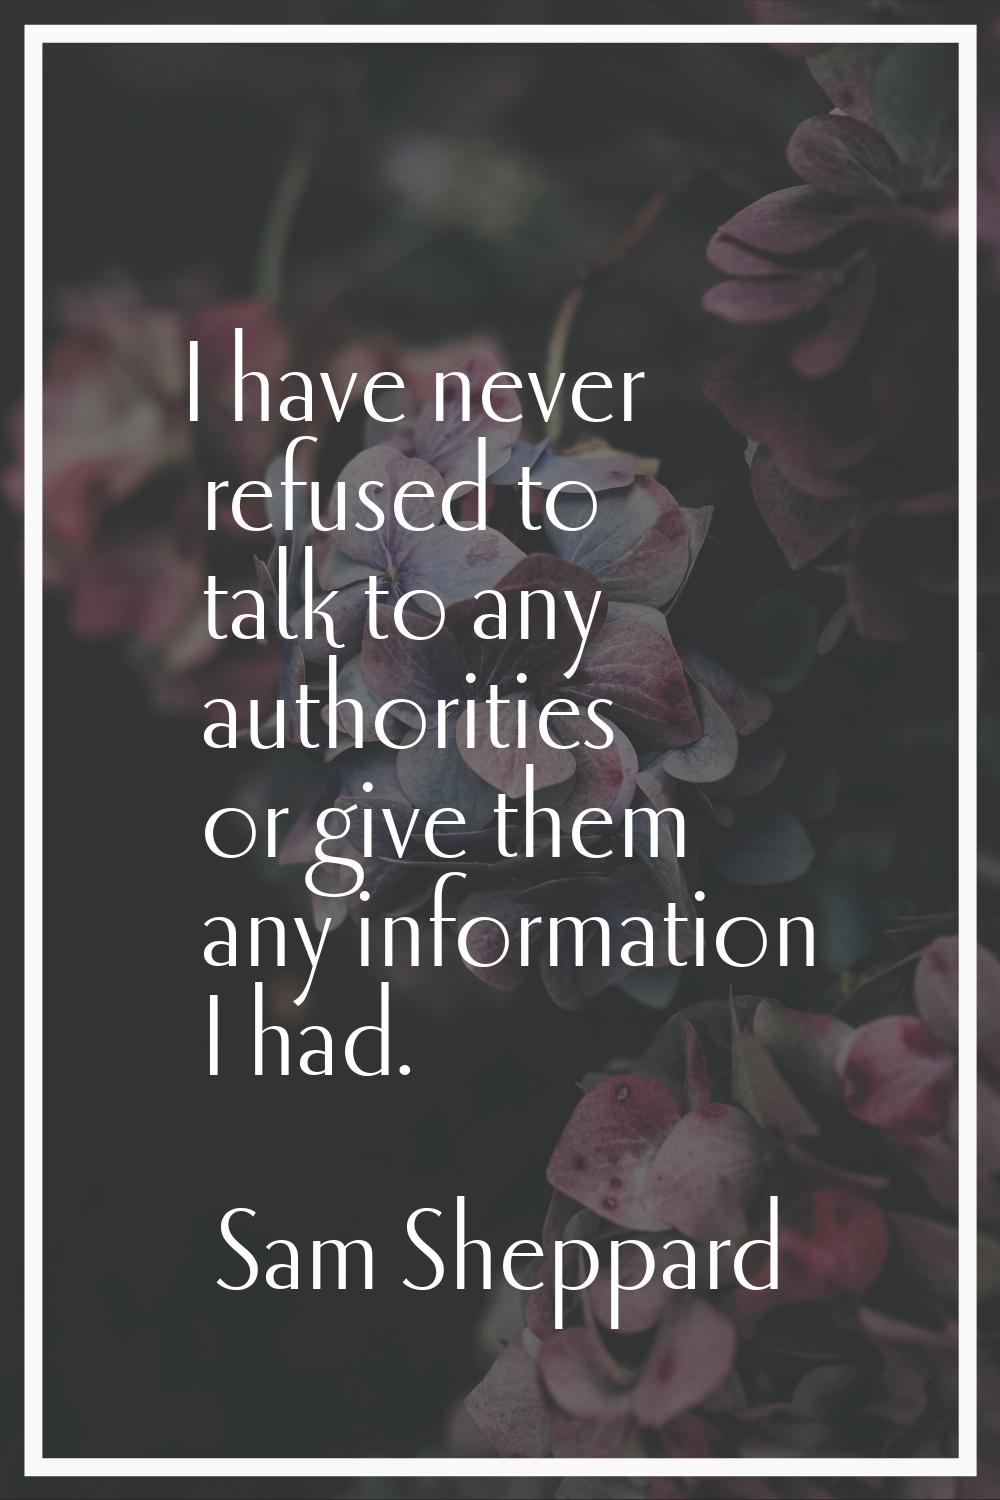 I have never refused to talk to any authorities or give them any information I had.